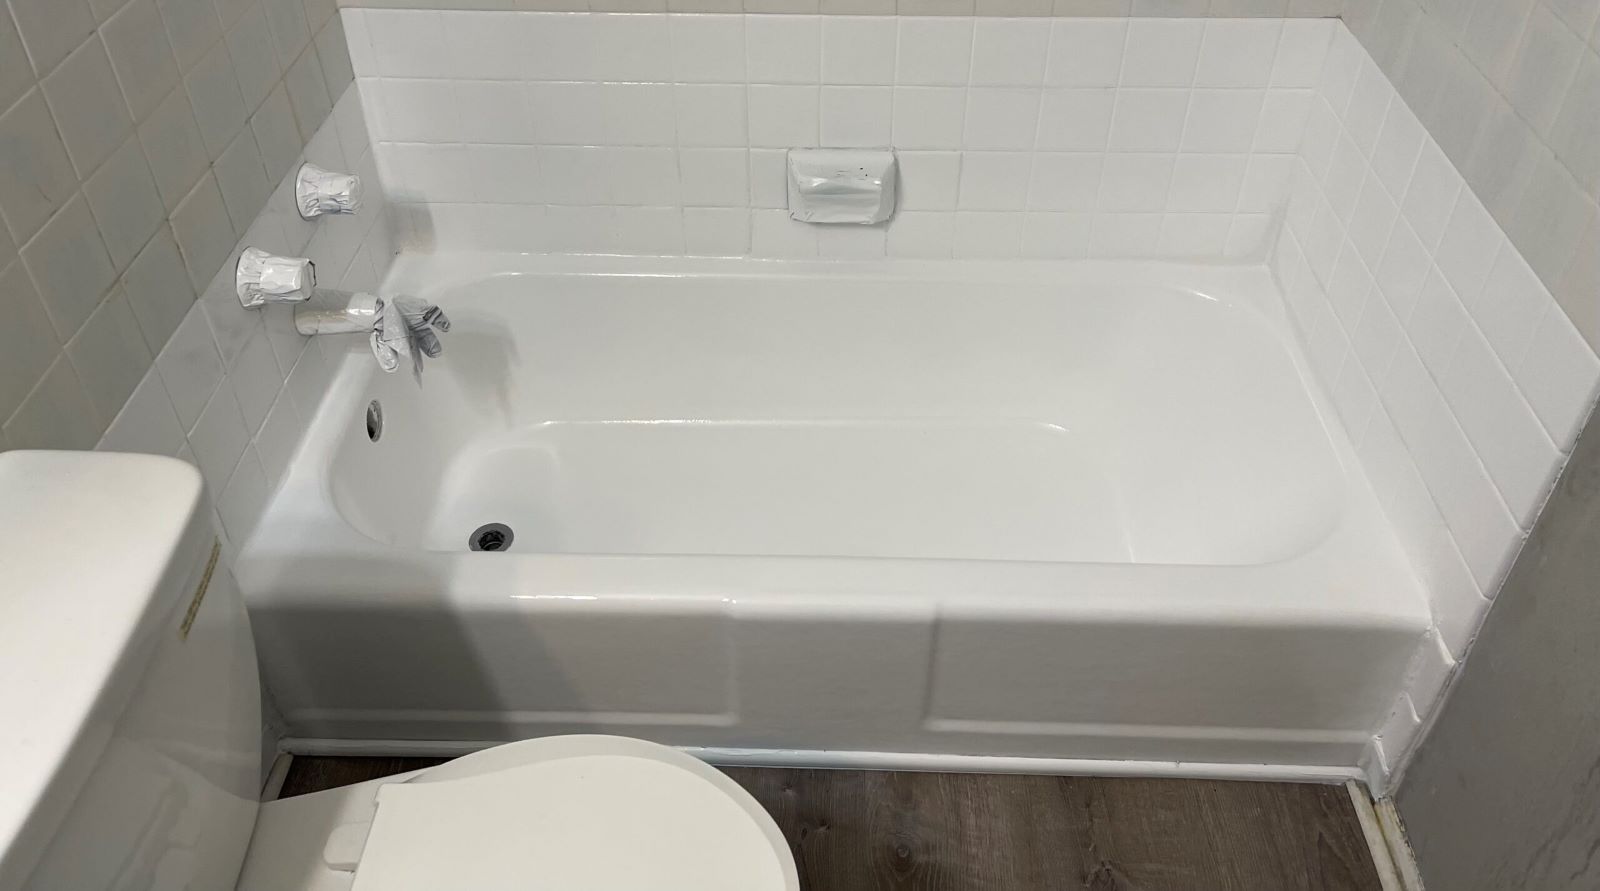 Low Cost Bathtub Refinishing in Town and Country, MO | Affordable Tub Reglazing Near Town and Country